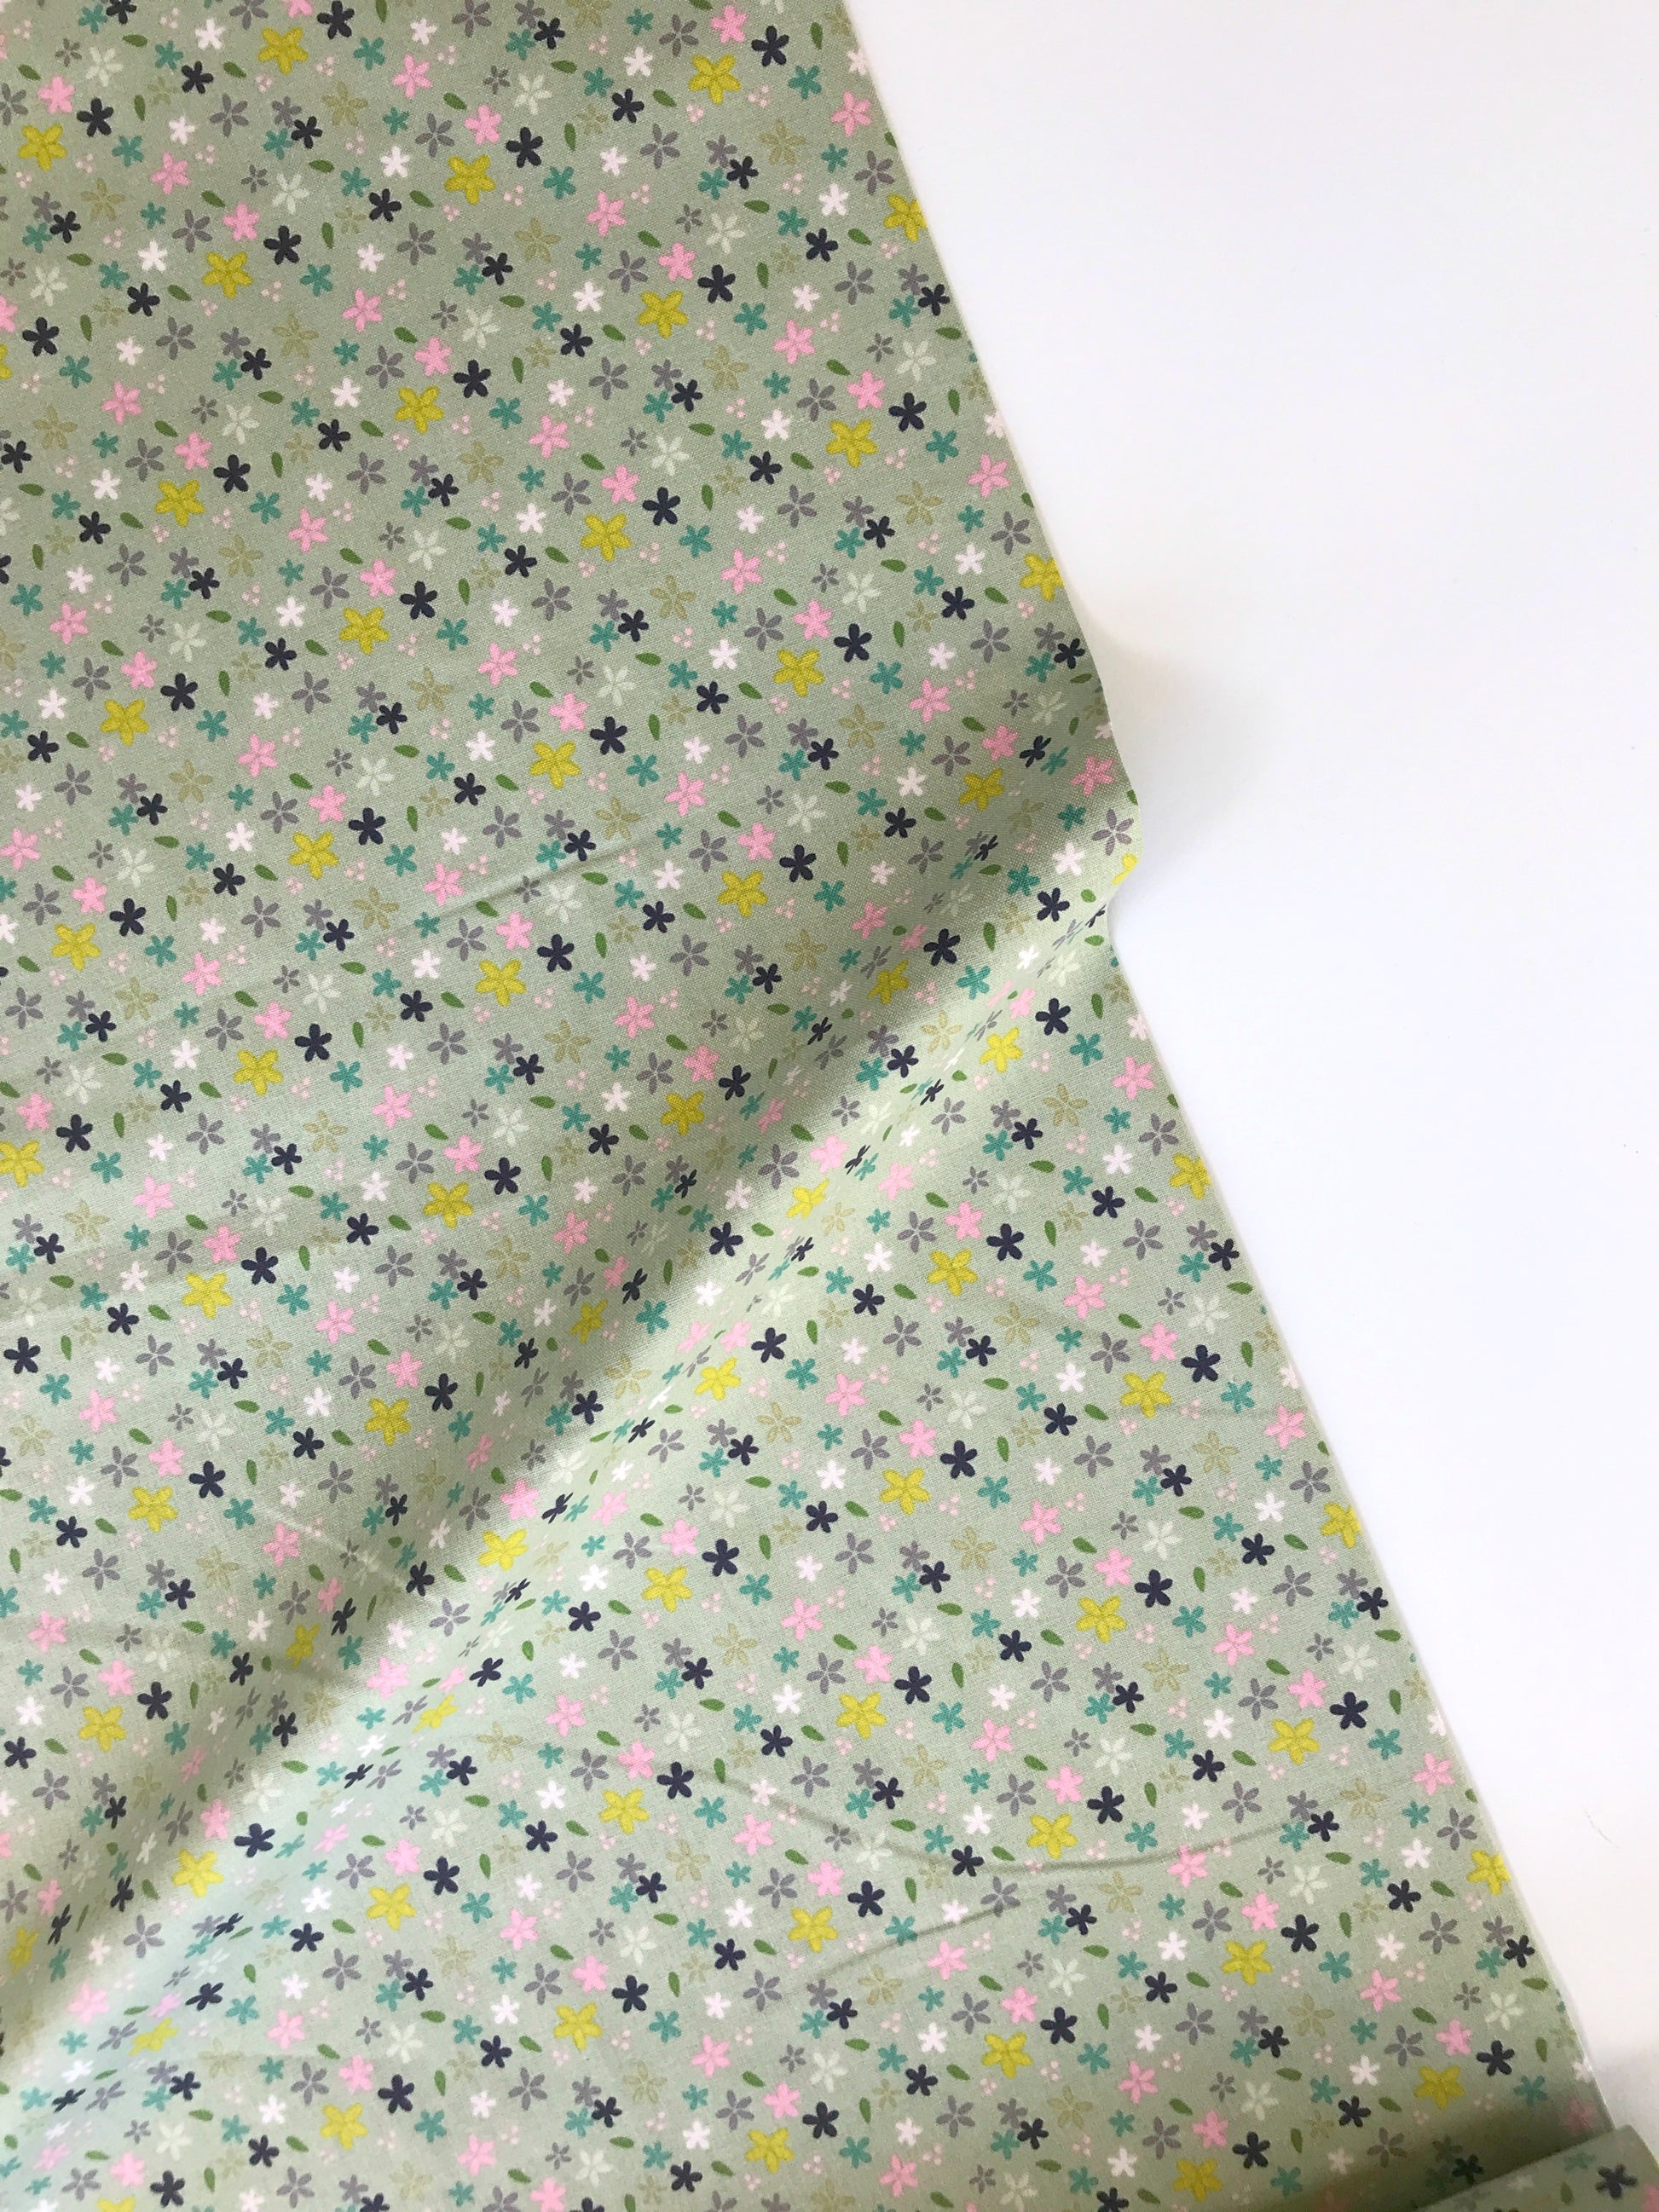 riley blake fabric christopher thompson mary elizabeth daisies grey quilters cotton Fabric Fetish